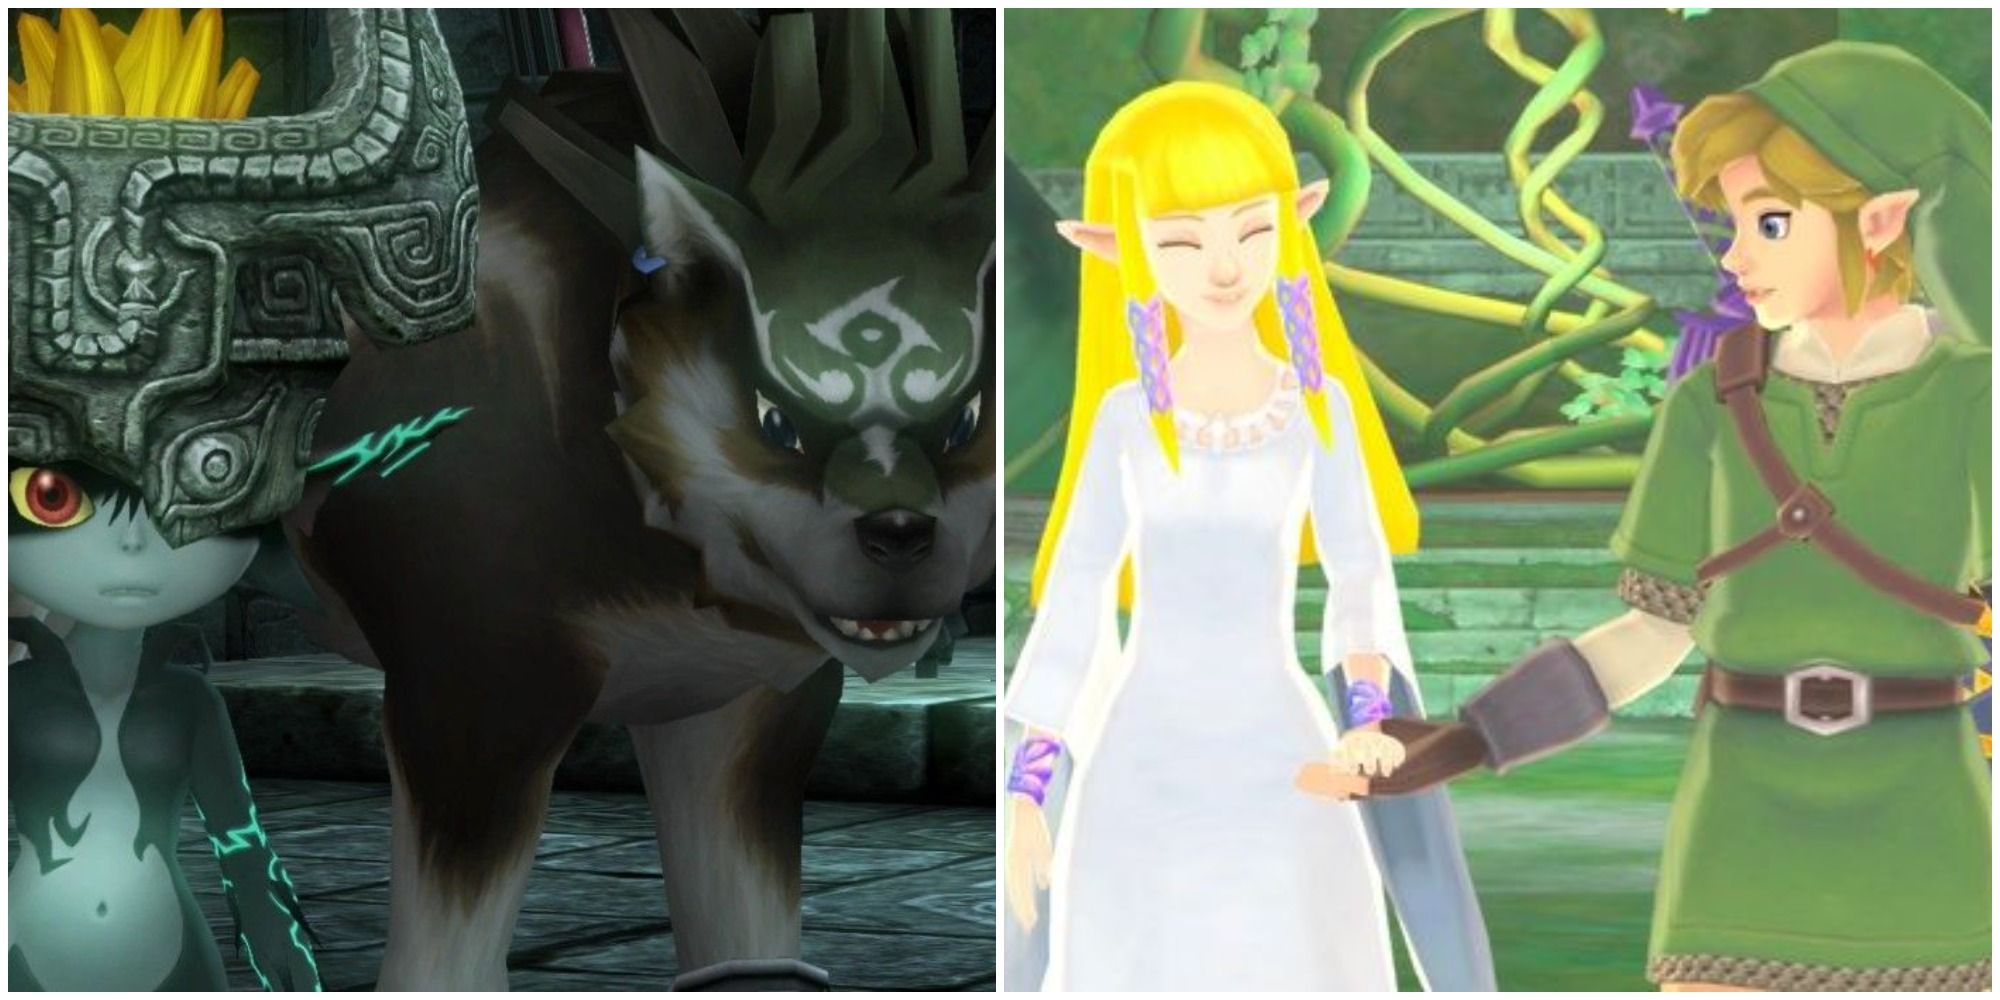 twilight-princess-vs-skyward-sword-which-is-the-best-zelda-game-on-the-nintendo-wii